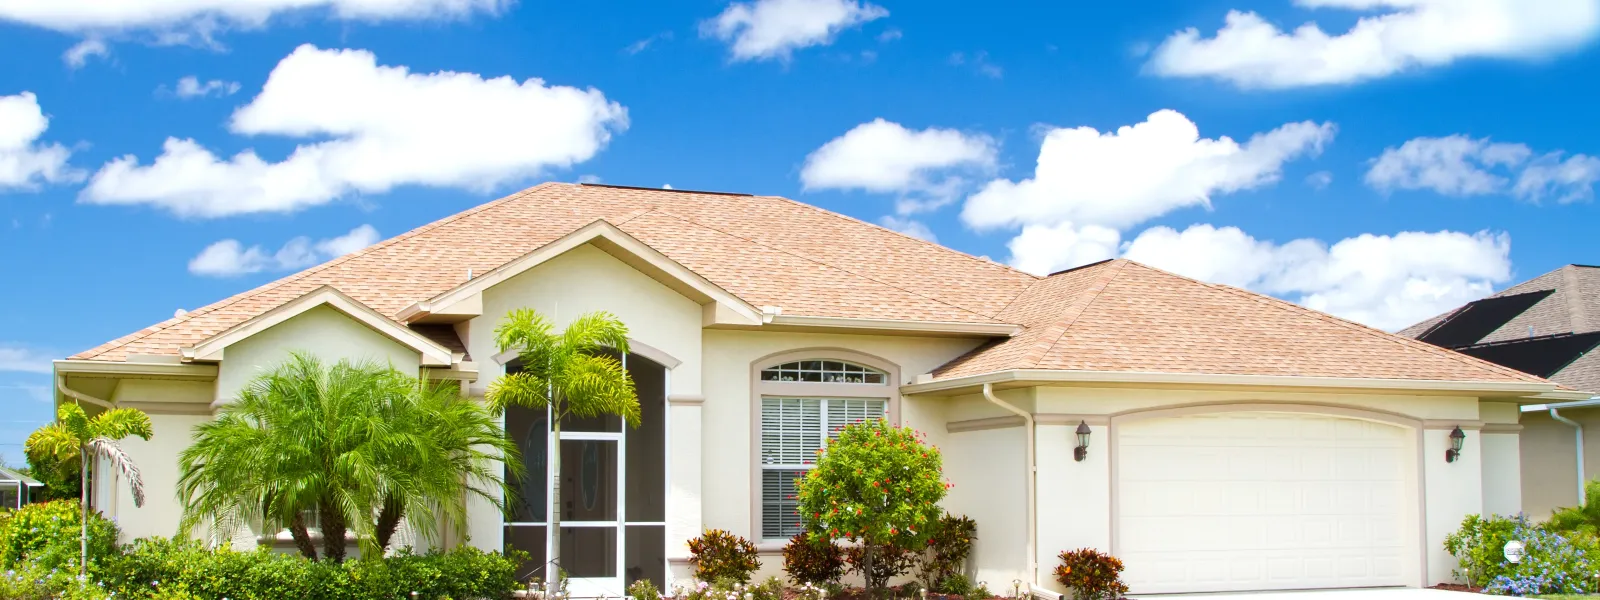 ARAC Roof It Forward Roof Replacement in Englewood, Florida